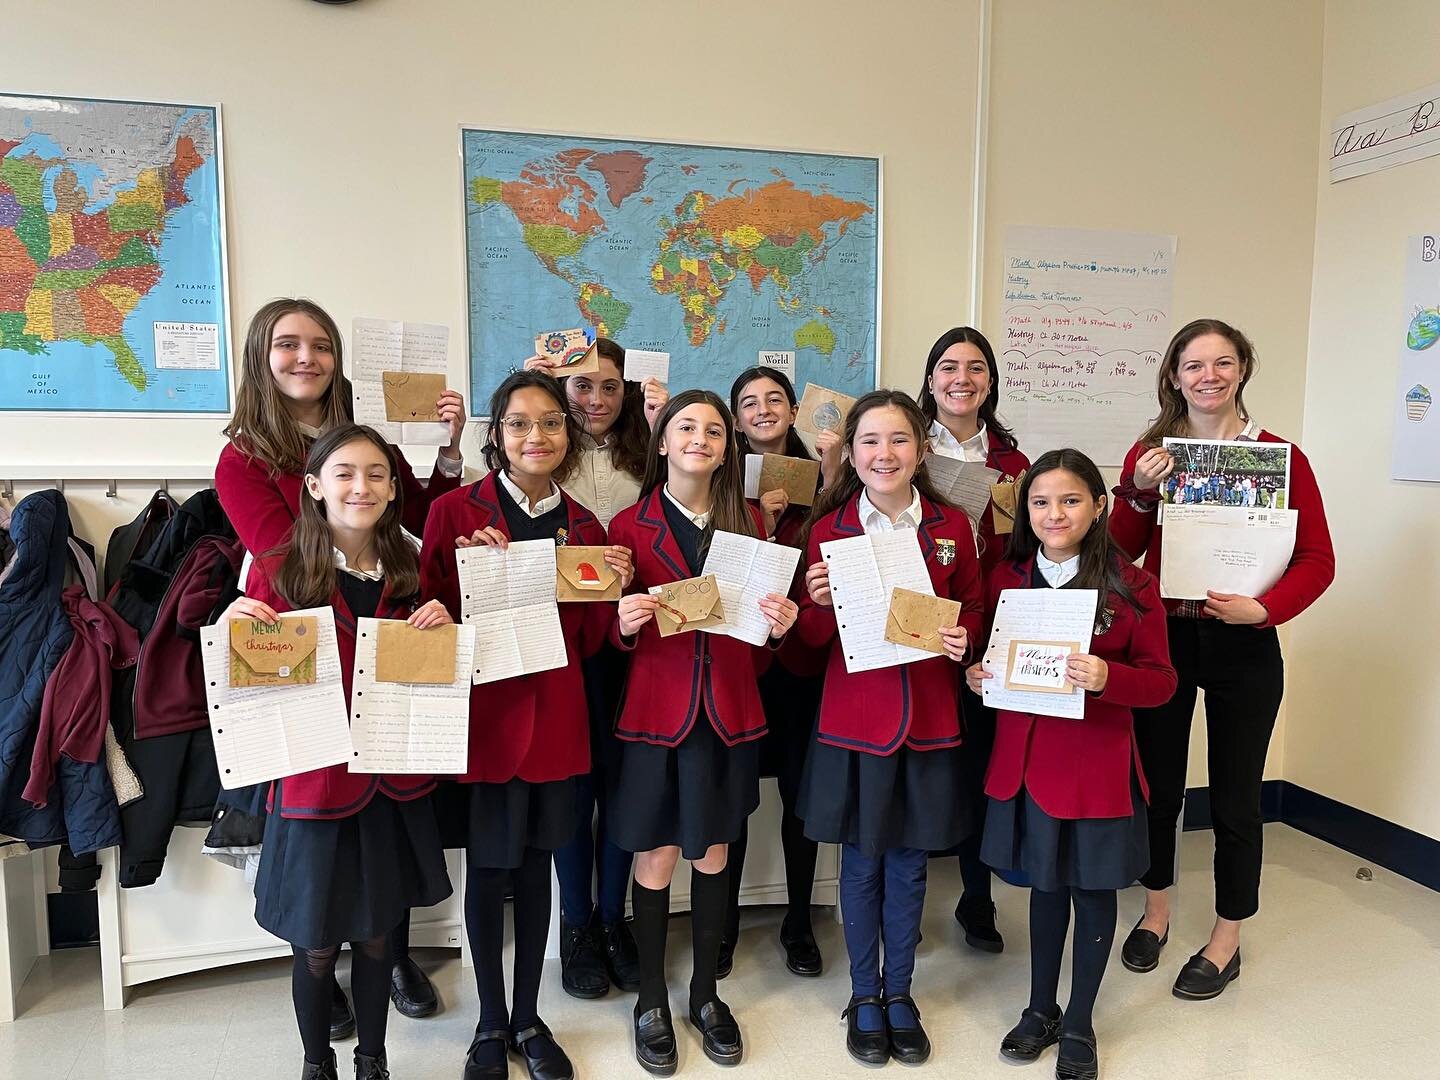 Today the middle school girls of The Hawthorn School received individual letters from pen pals at one of our sister schools in San Jose, Costa Rica. We are beginning an exciting bicultural exchange with the girls of the Irib&oacute; School, part of C